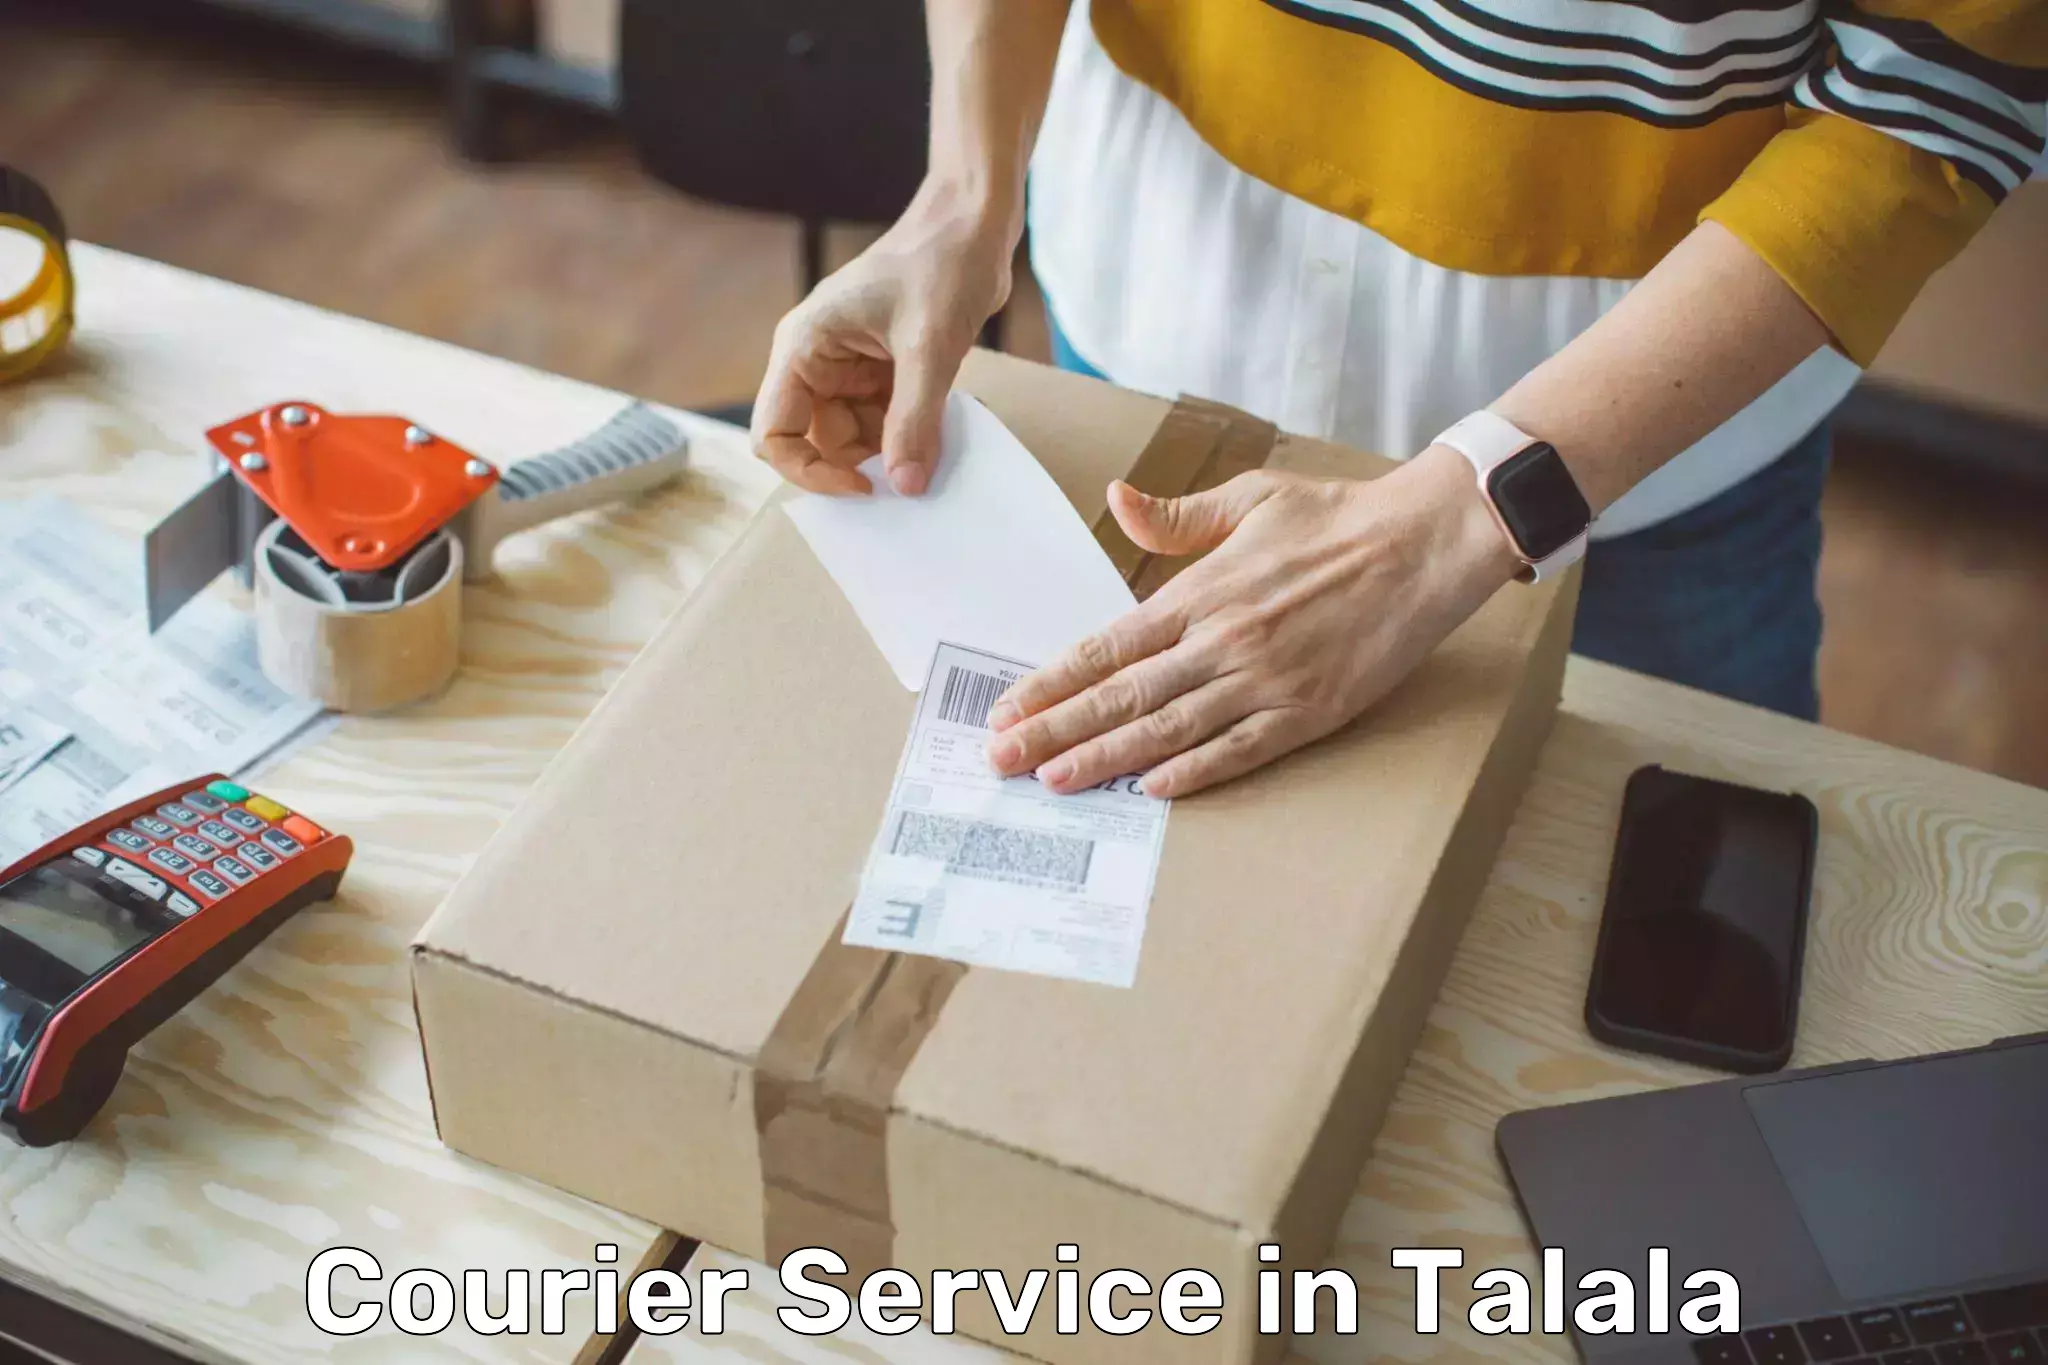 Cost-effective courier options in Talala